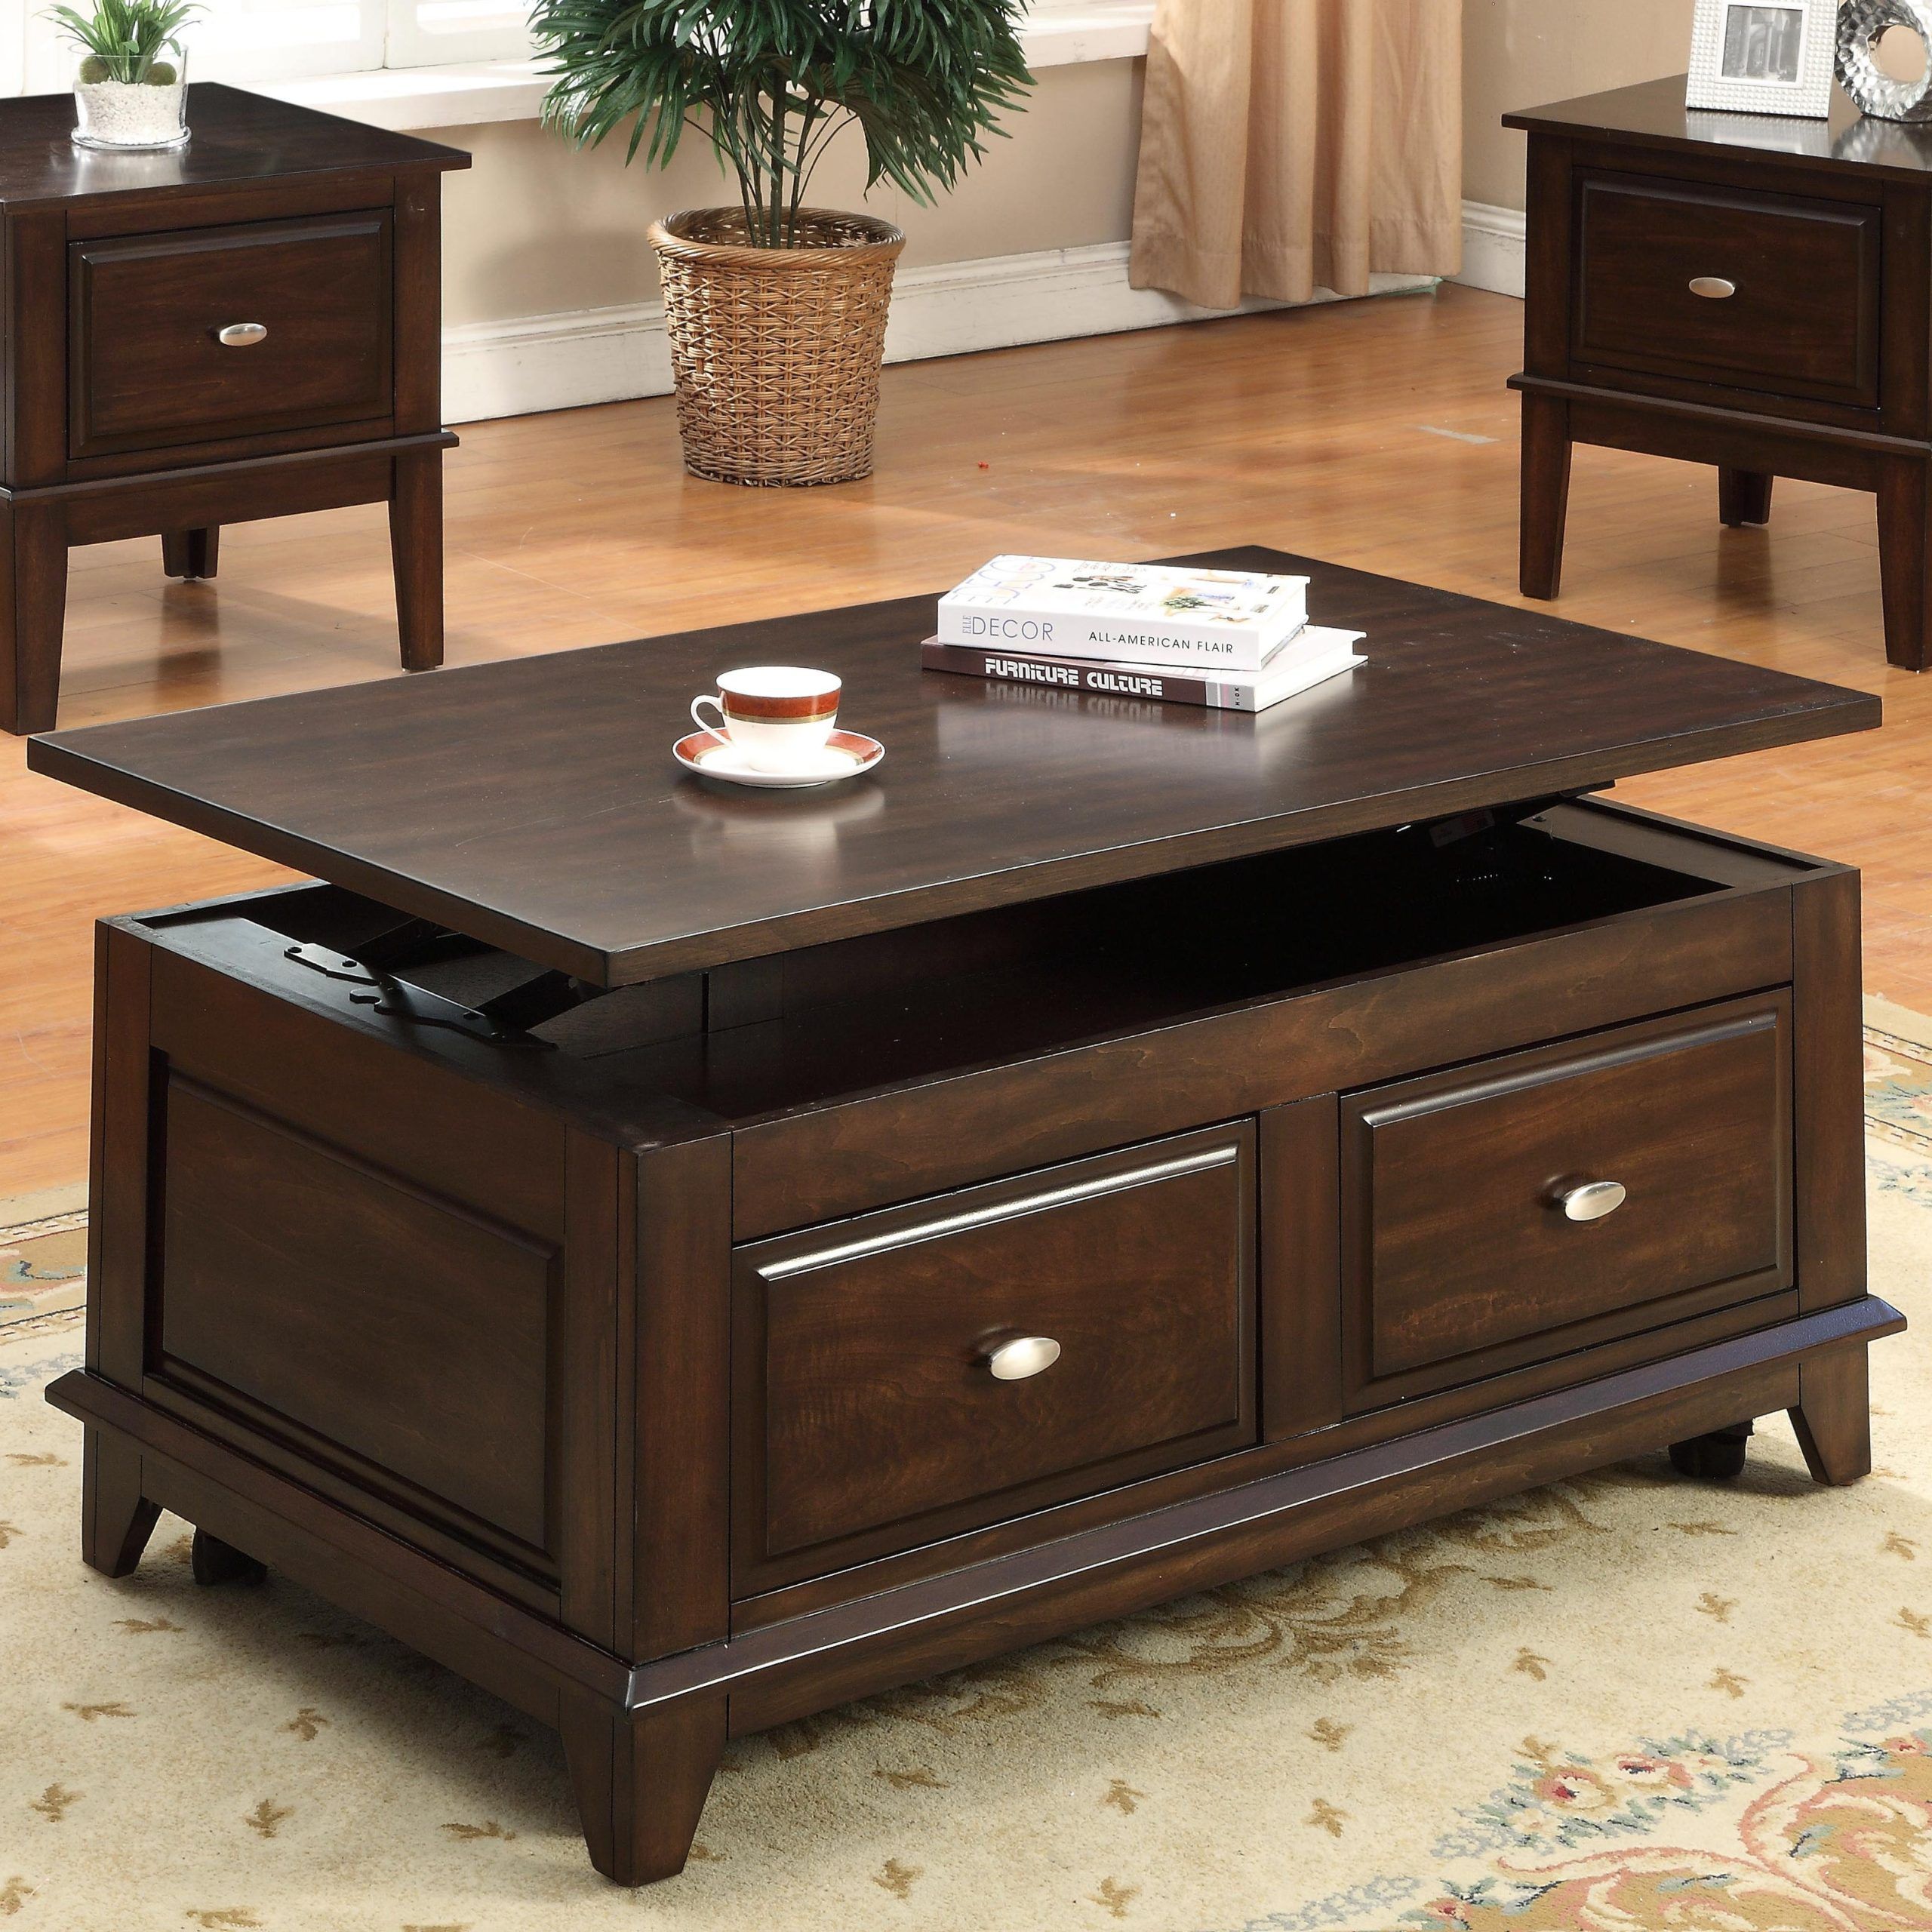 Lift Top Coffee Table Ff0 Throughout High Gloss Lift Top Coffee Tables (Gallery 21 of 21)